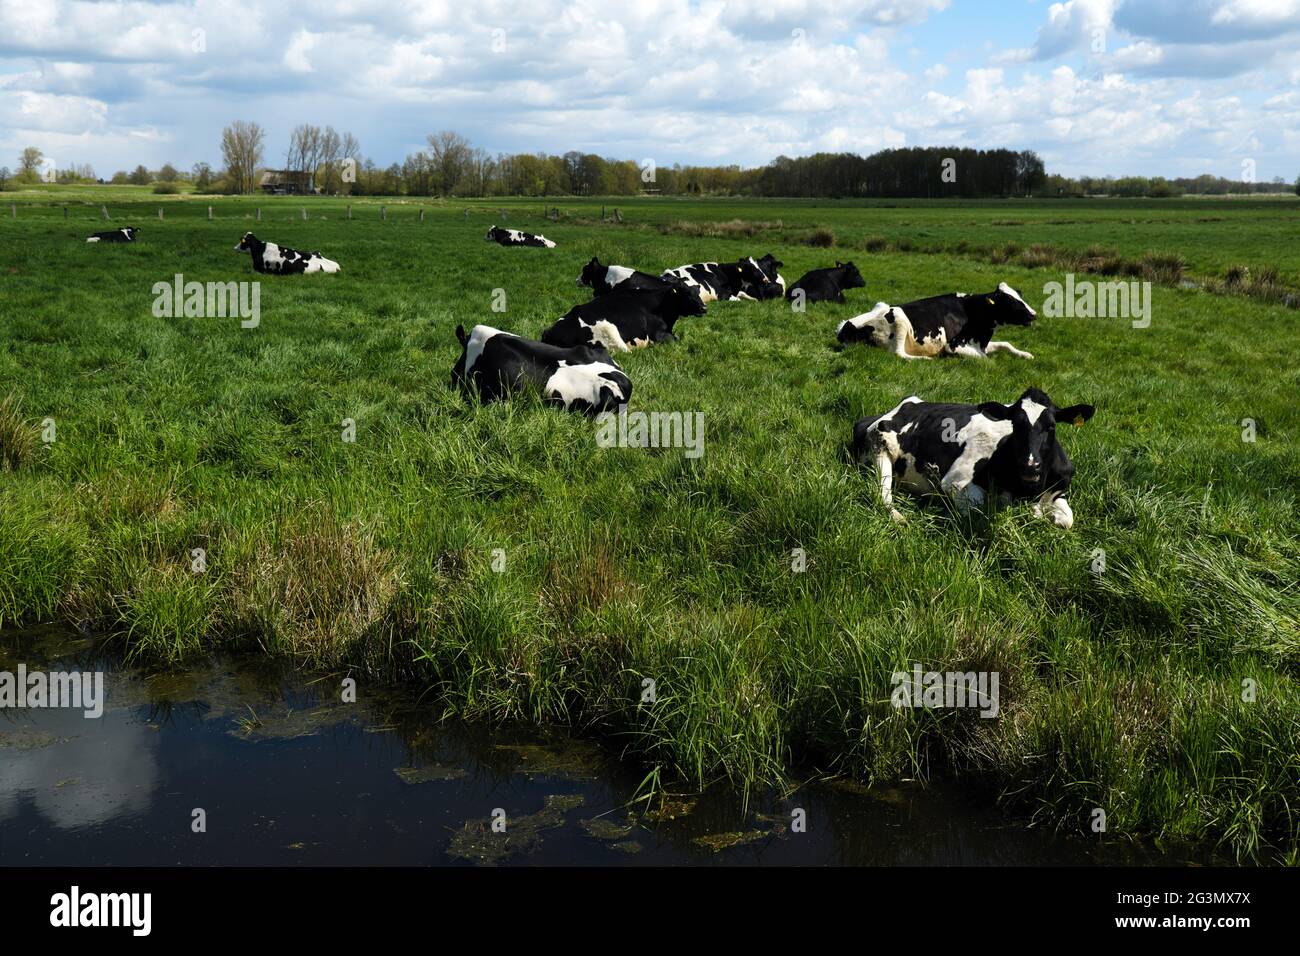 '06.05.2021, Bremen, Bremen, Germany - Sitting cows on the pasture in the landscape conservation area Blockland. 00A210506D016CAROEX.JPG [MODEL RELEAS Stock Photo